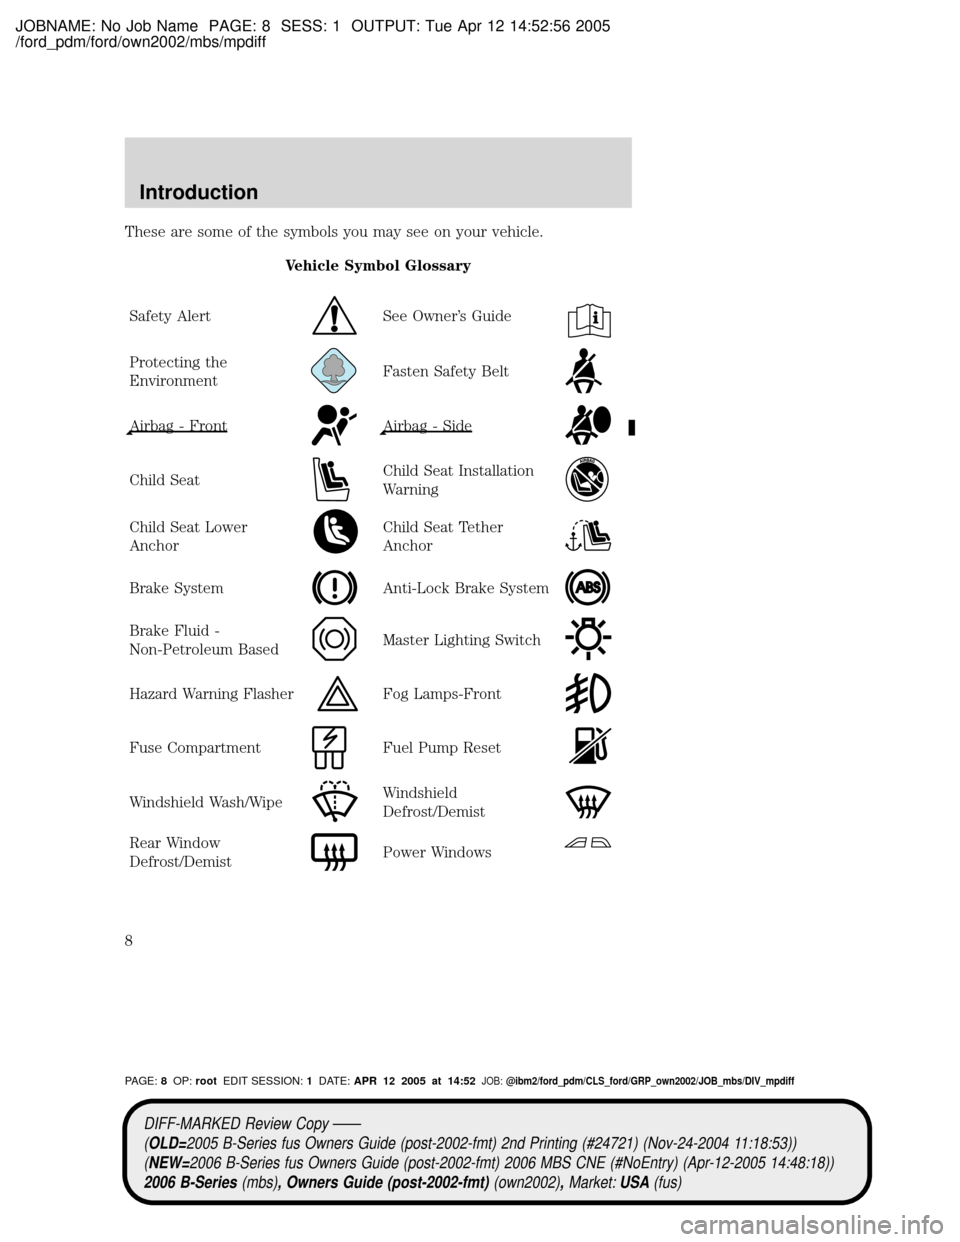 MAZDA MODEL B2300 TRUCK 2006  Owners Manual (in English) JOBNAME: No Job Name PAGE: 8 SESS: 1 OUTPUT: Tue Apr 12 14:52:56 2005
/ford_pdm/ford/own2002/mbs/mpdiff
These are some of the symbols you may see on your vehicle.
Vehicle Symbol Glossary
Safety Alert
